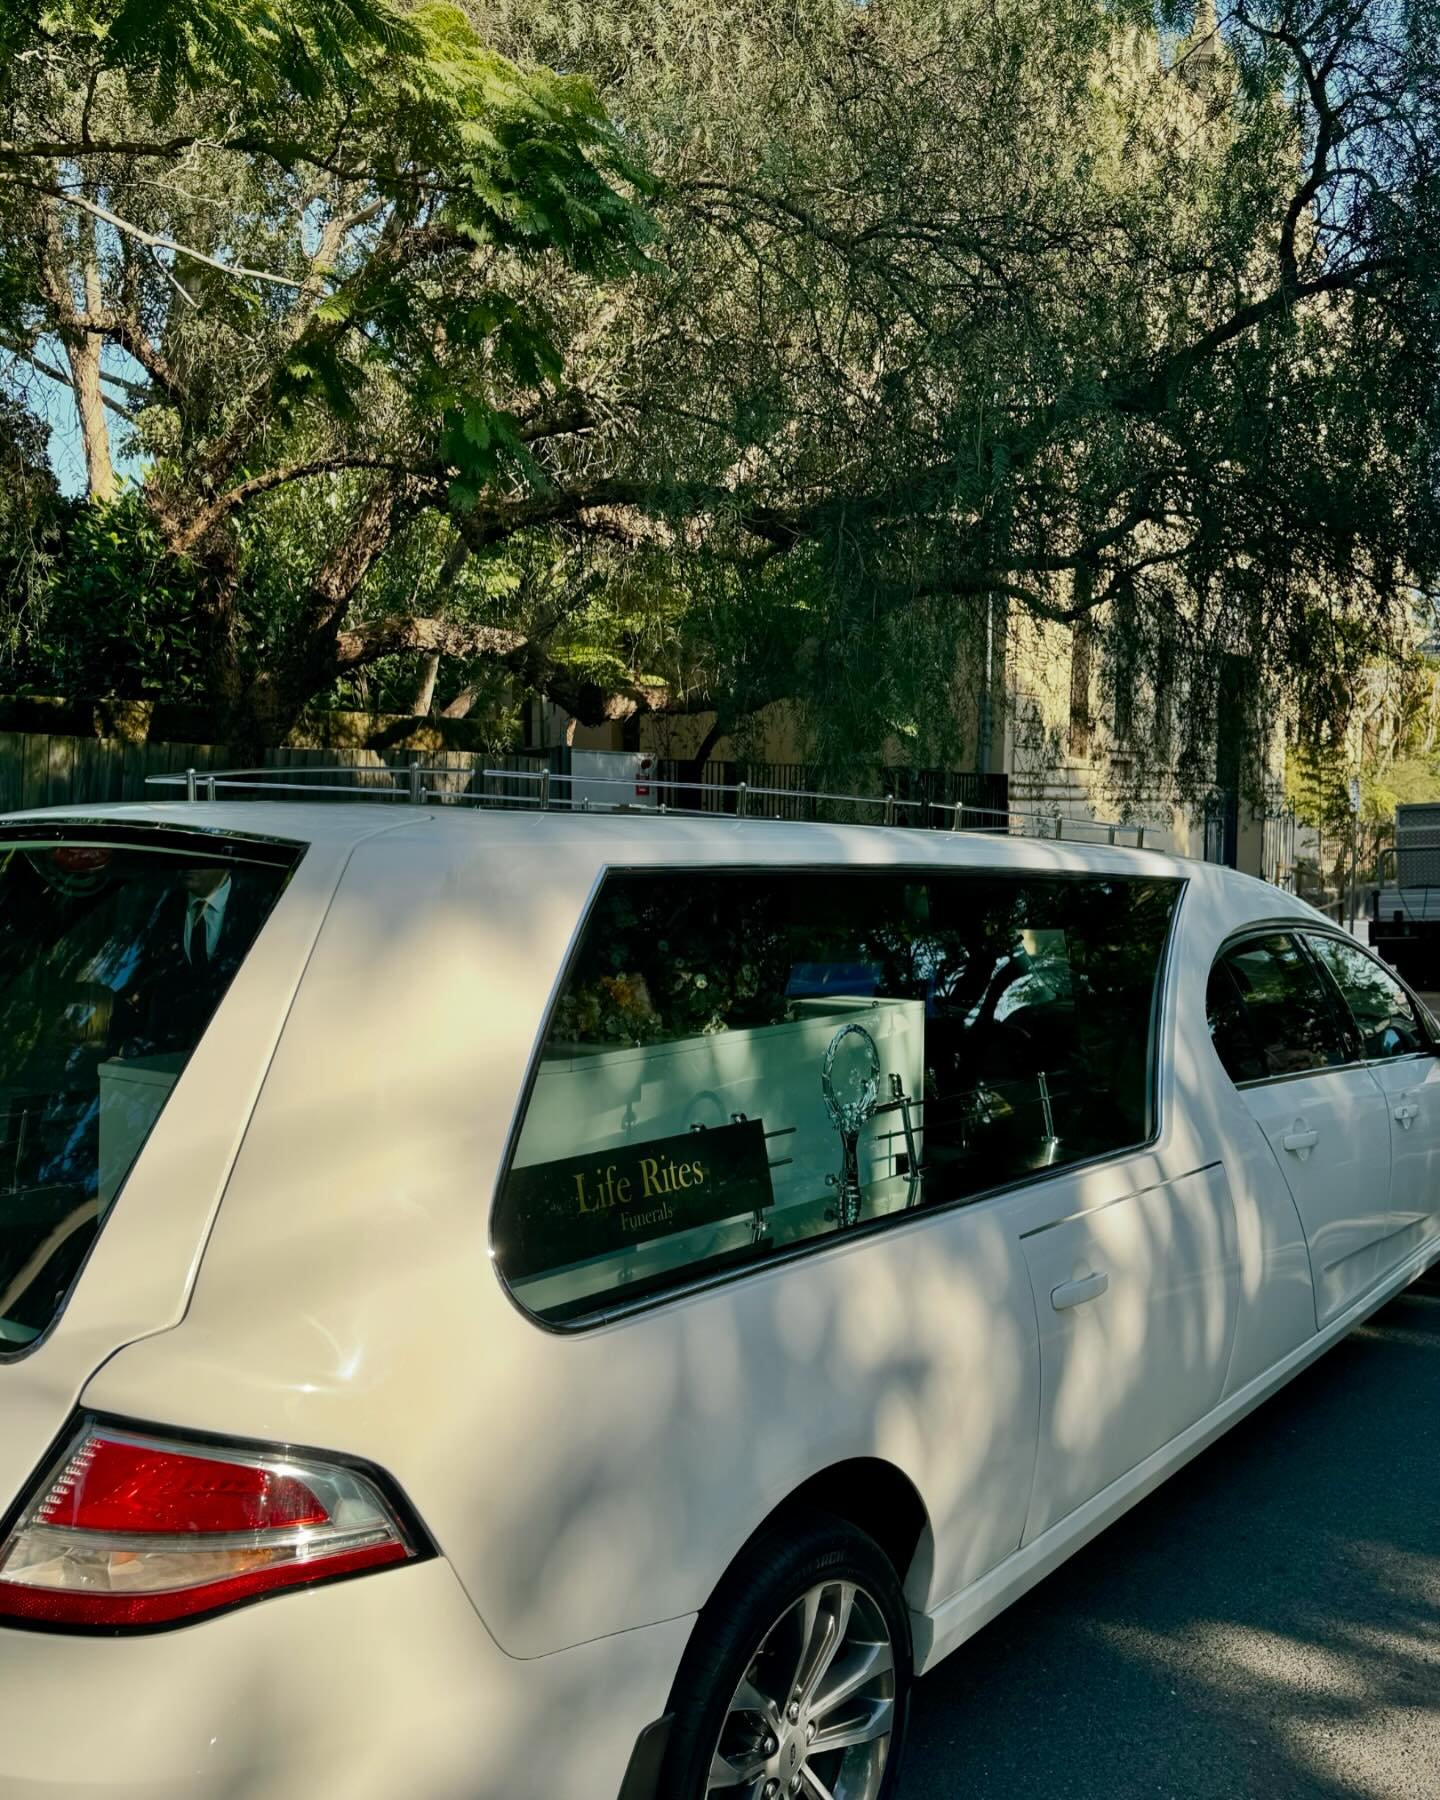 We love working with independent&nbsp;hearse company Dignified Transport. Here is one of their shiny hearses pulling up to Glebe Town Hall for a recent funeral. What kind of vehicle would you like to arrive at your funeral in?